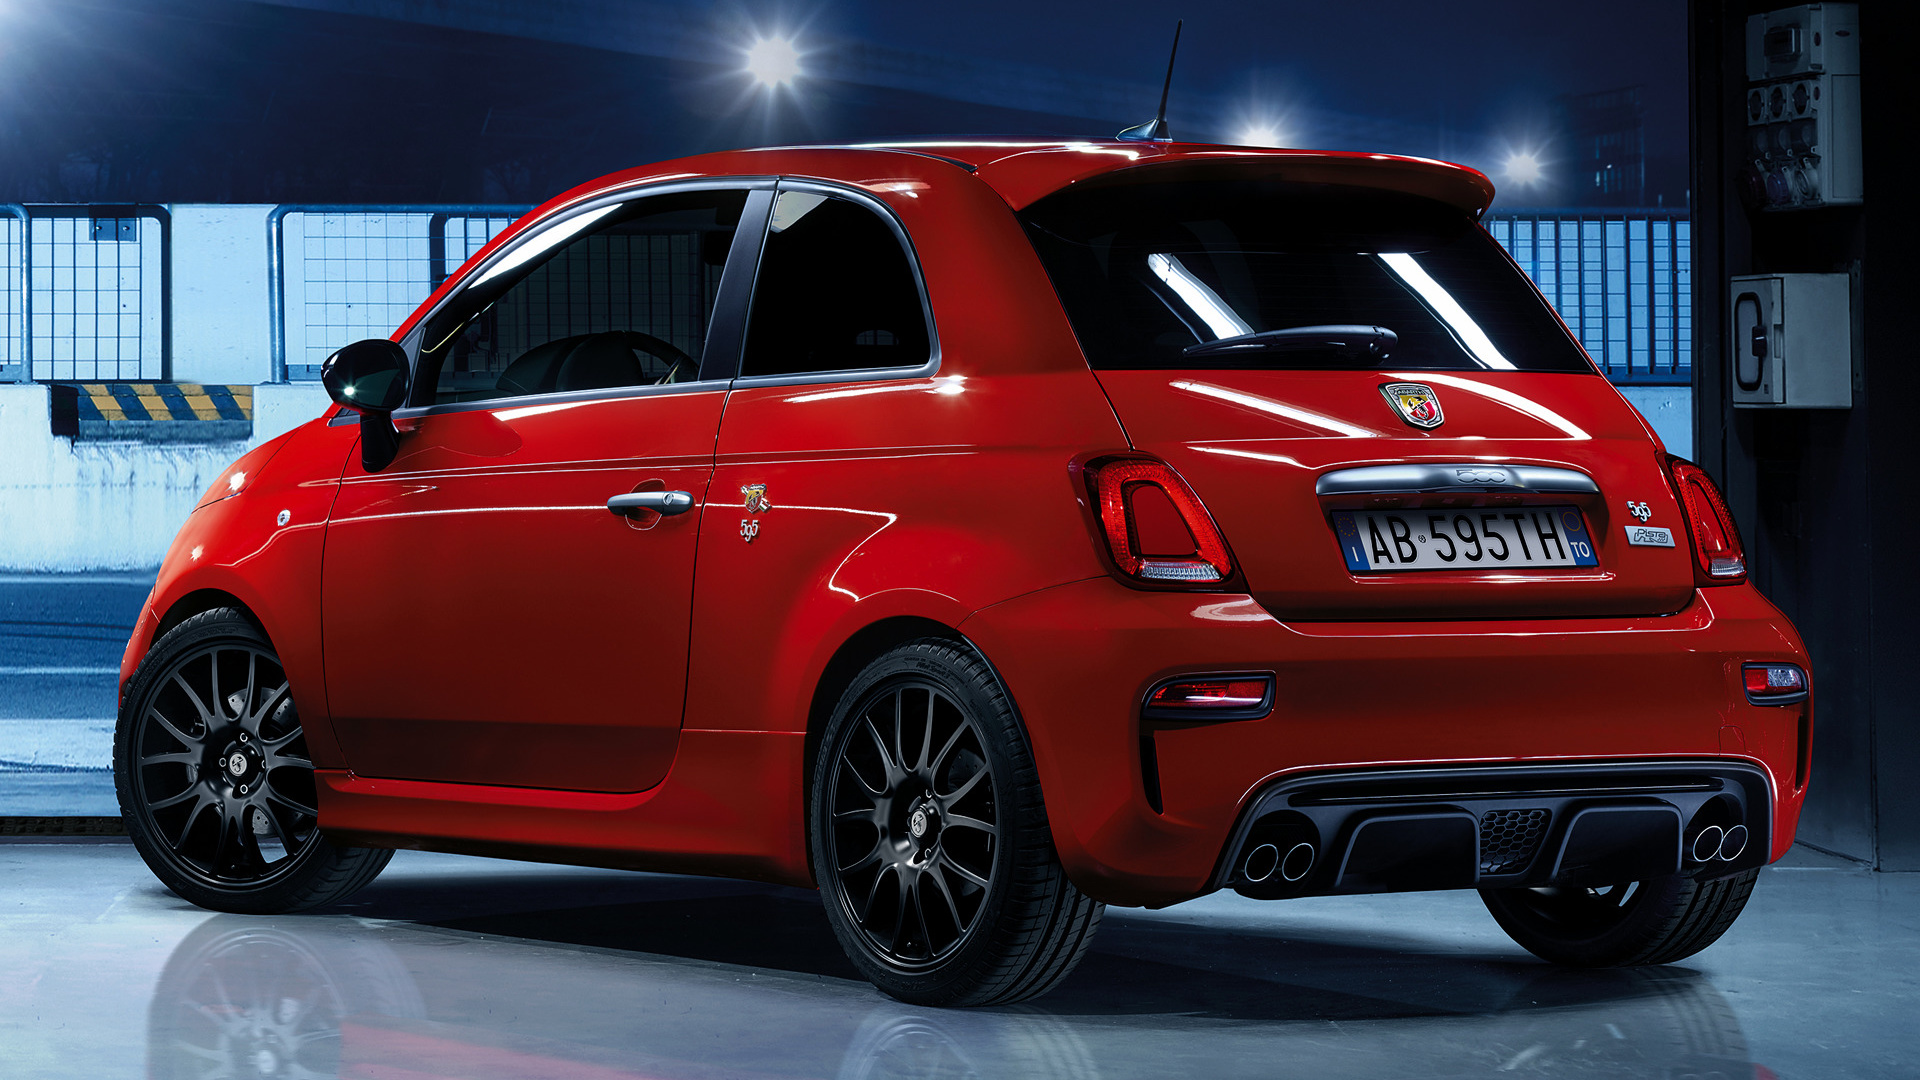 Abarth 595 Pista 2017 Wallpapers And Hd Images Car - Abarth 595 Tuned , HD Wallpaper & Backgrounds